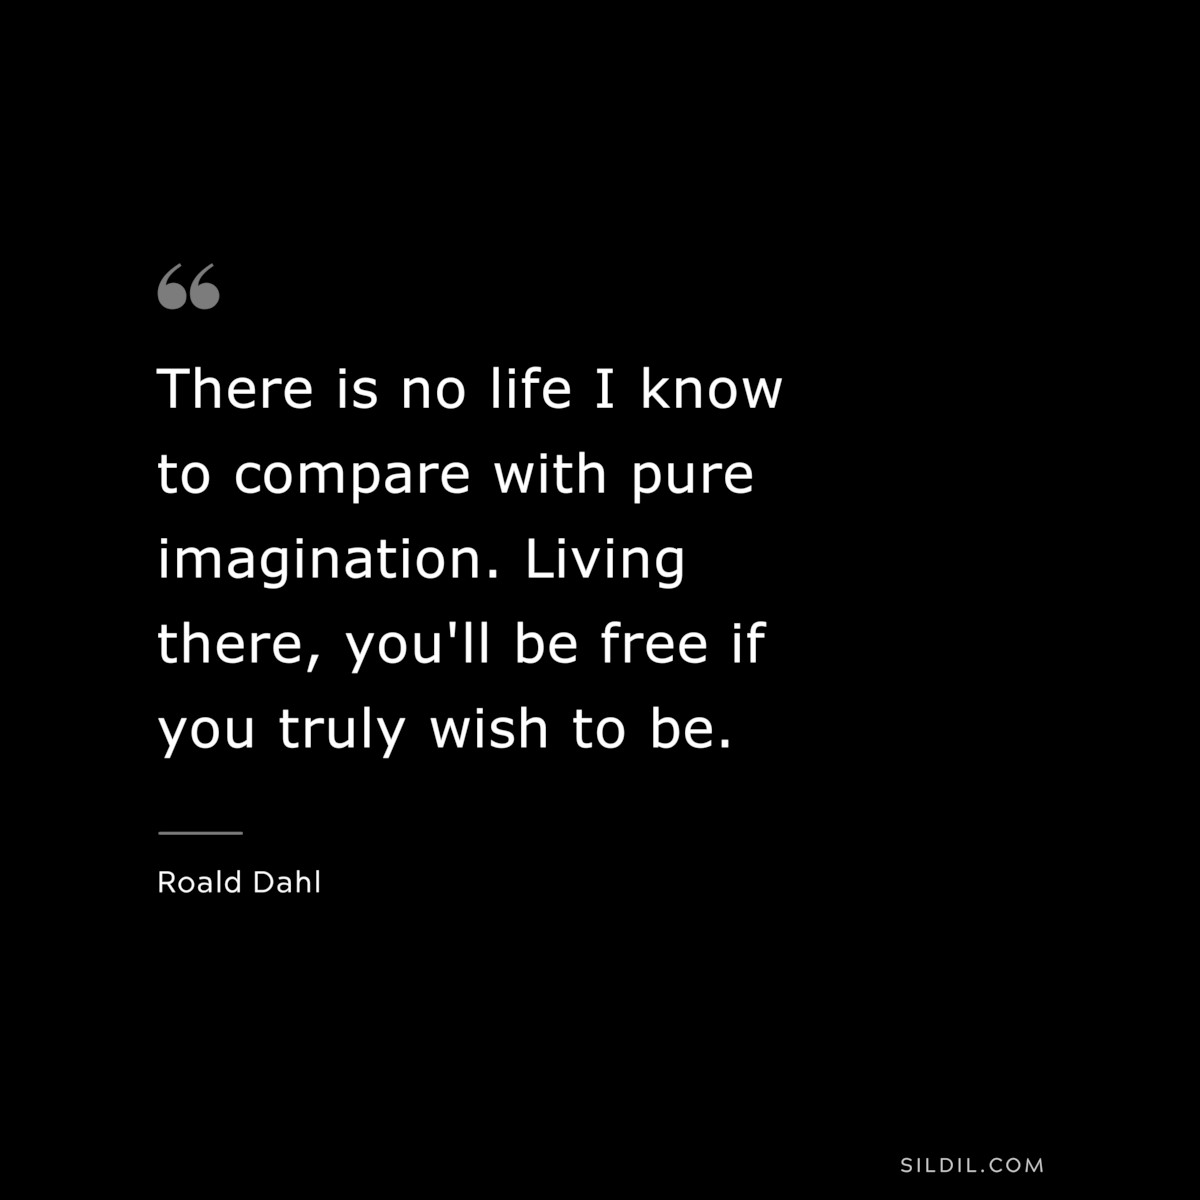 There is no life I know to compare with pure imagination. Living there, you'll be free if you truly wish to be. ― Roald Dahl